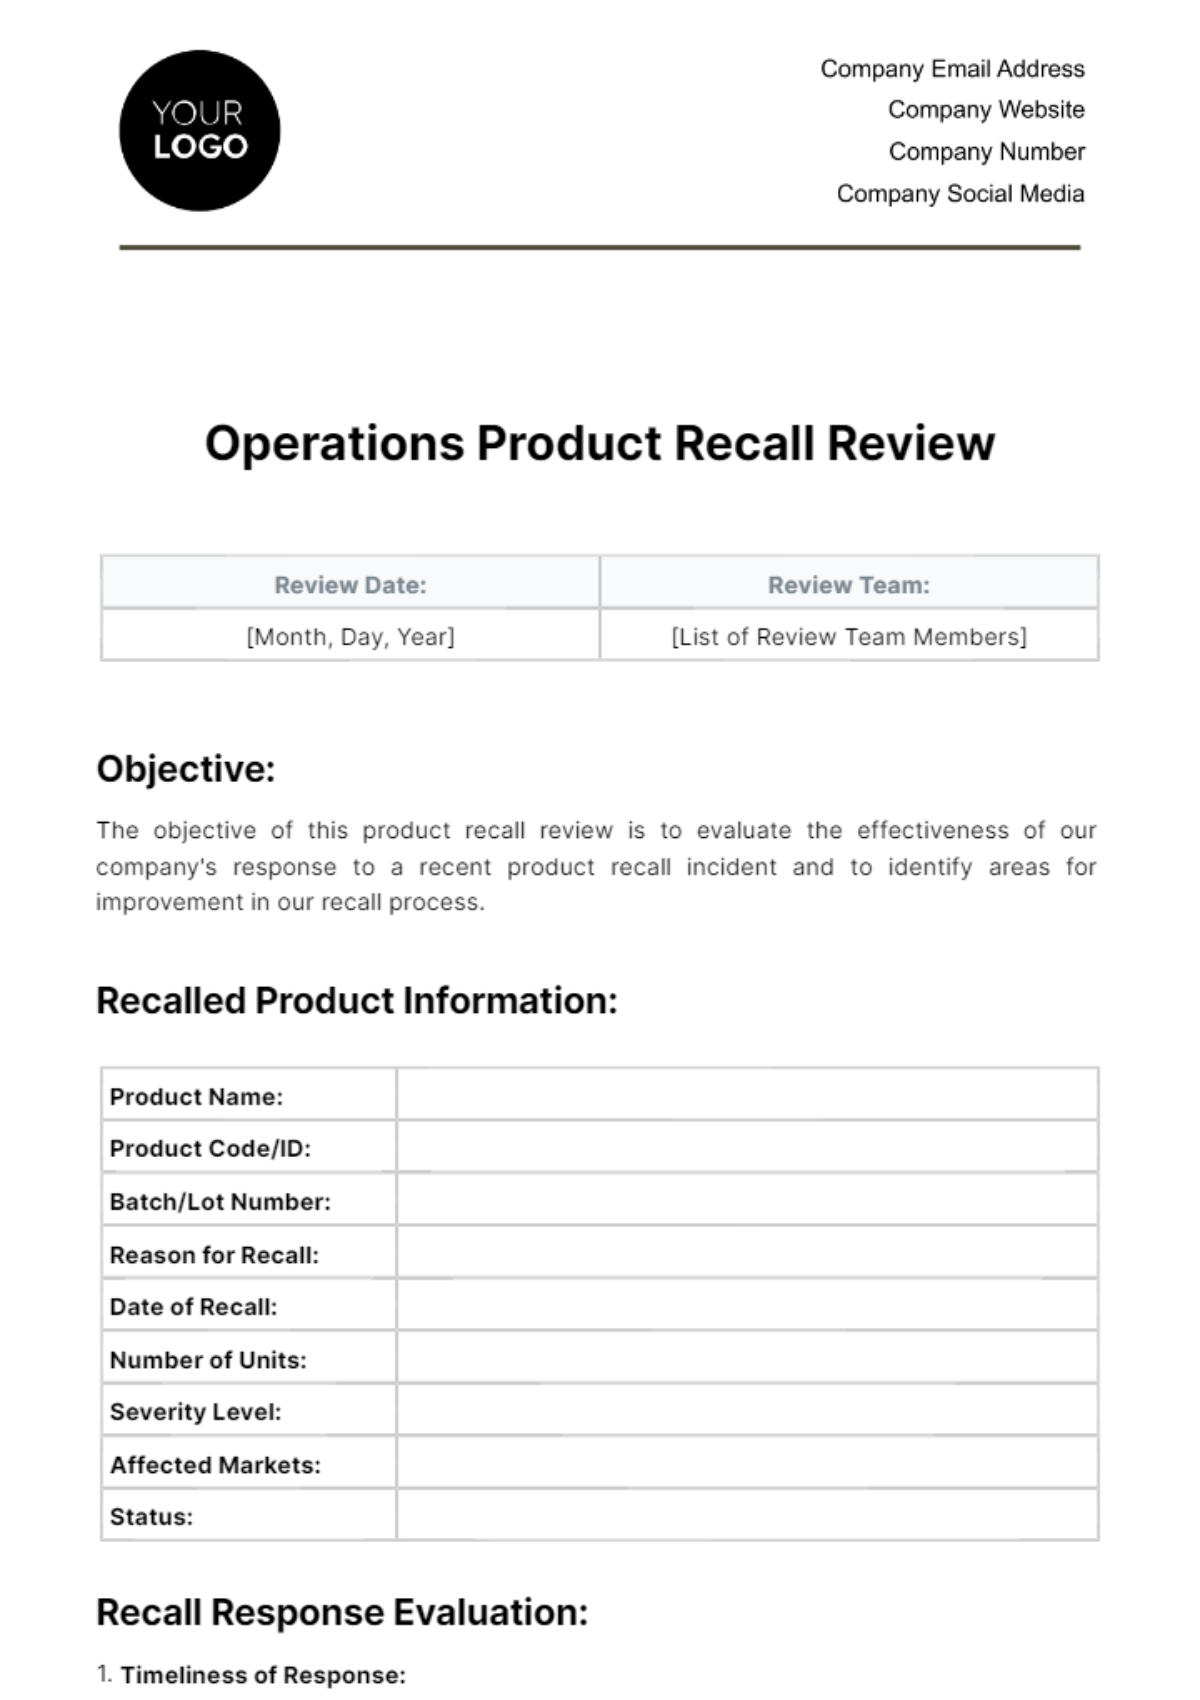 Free Operations Product Recall Review Template